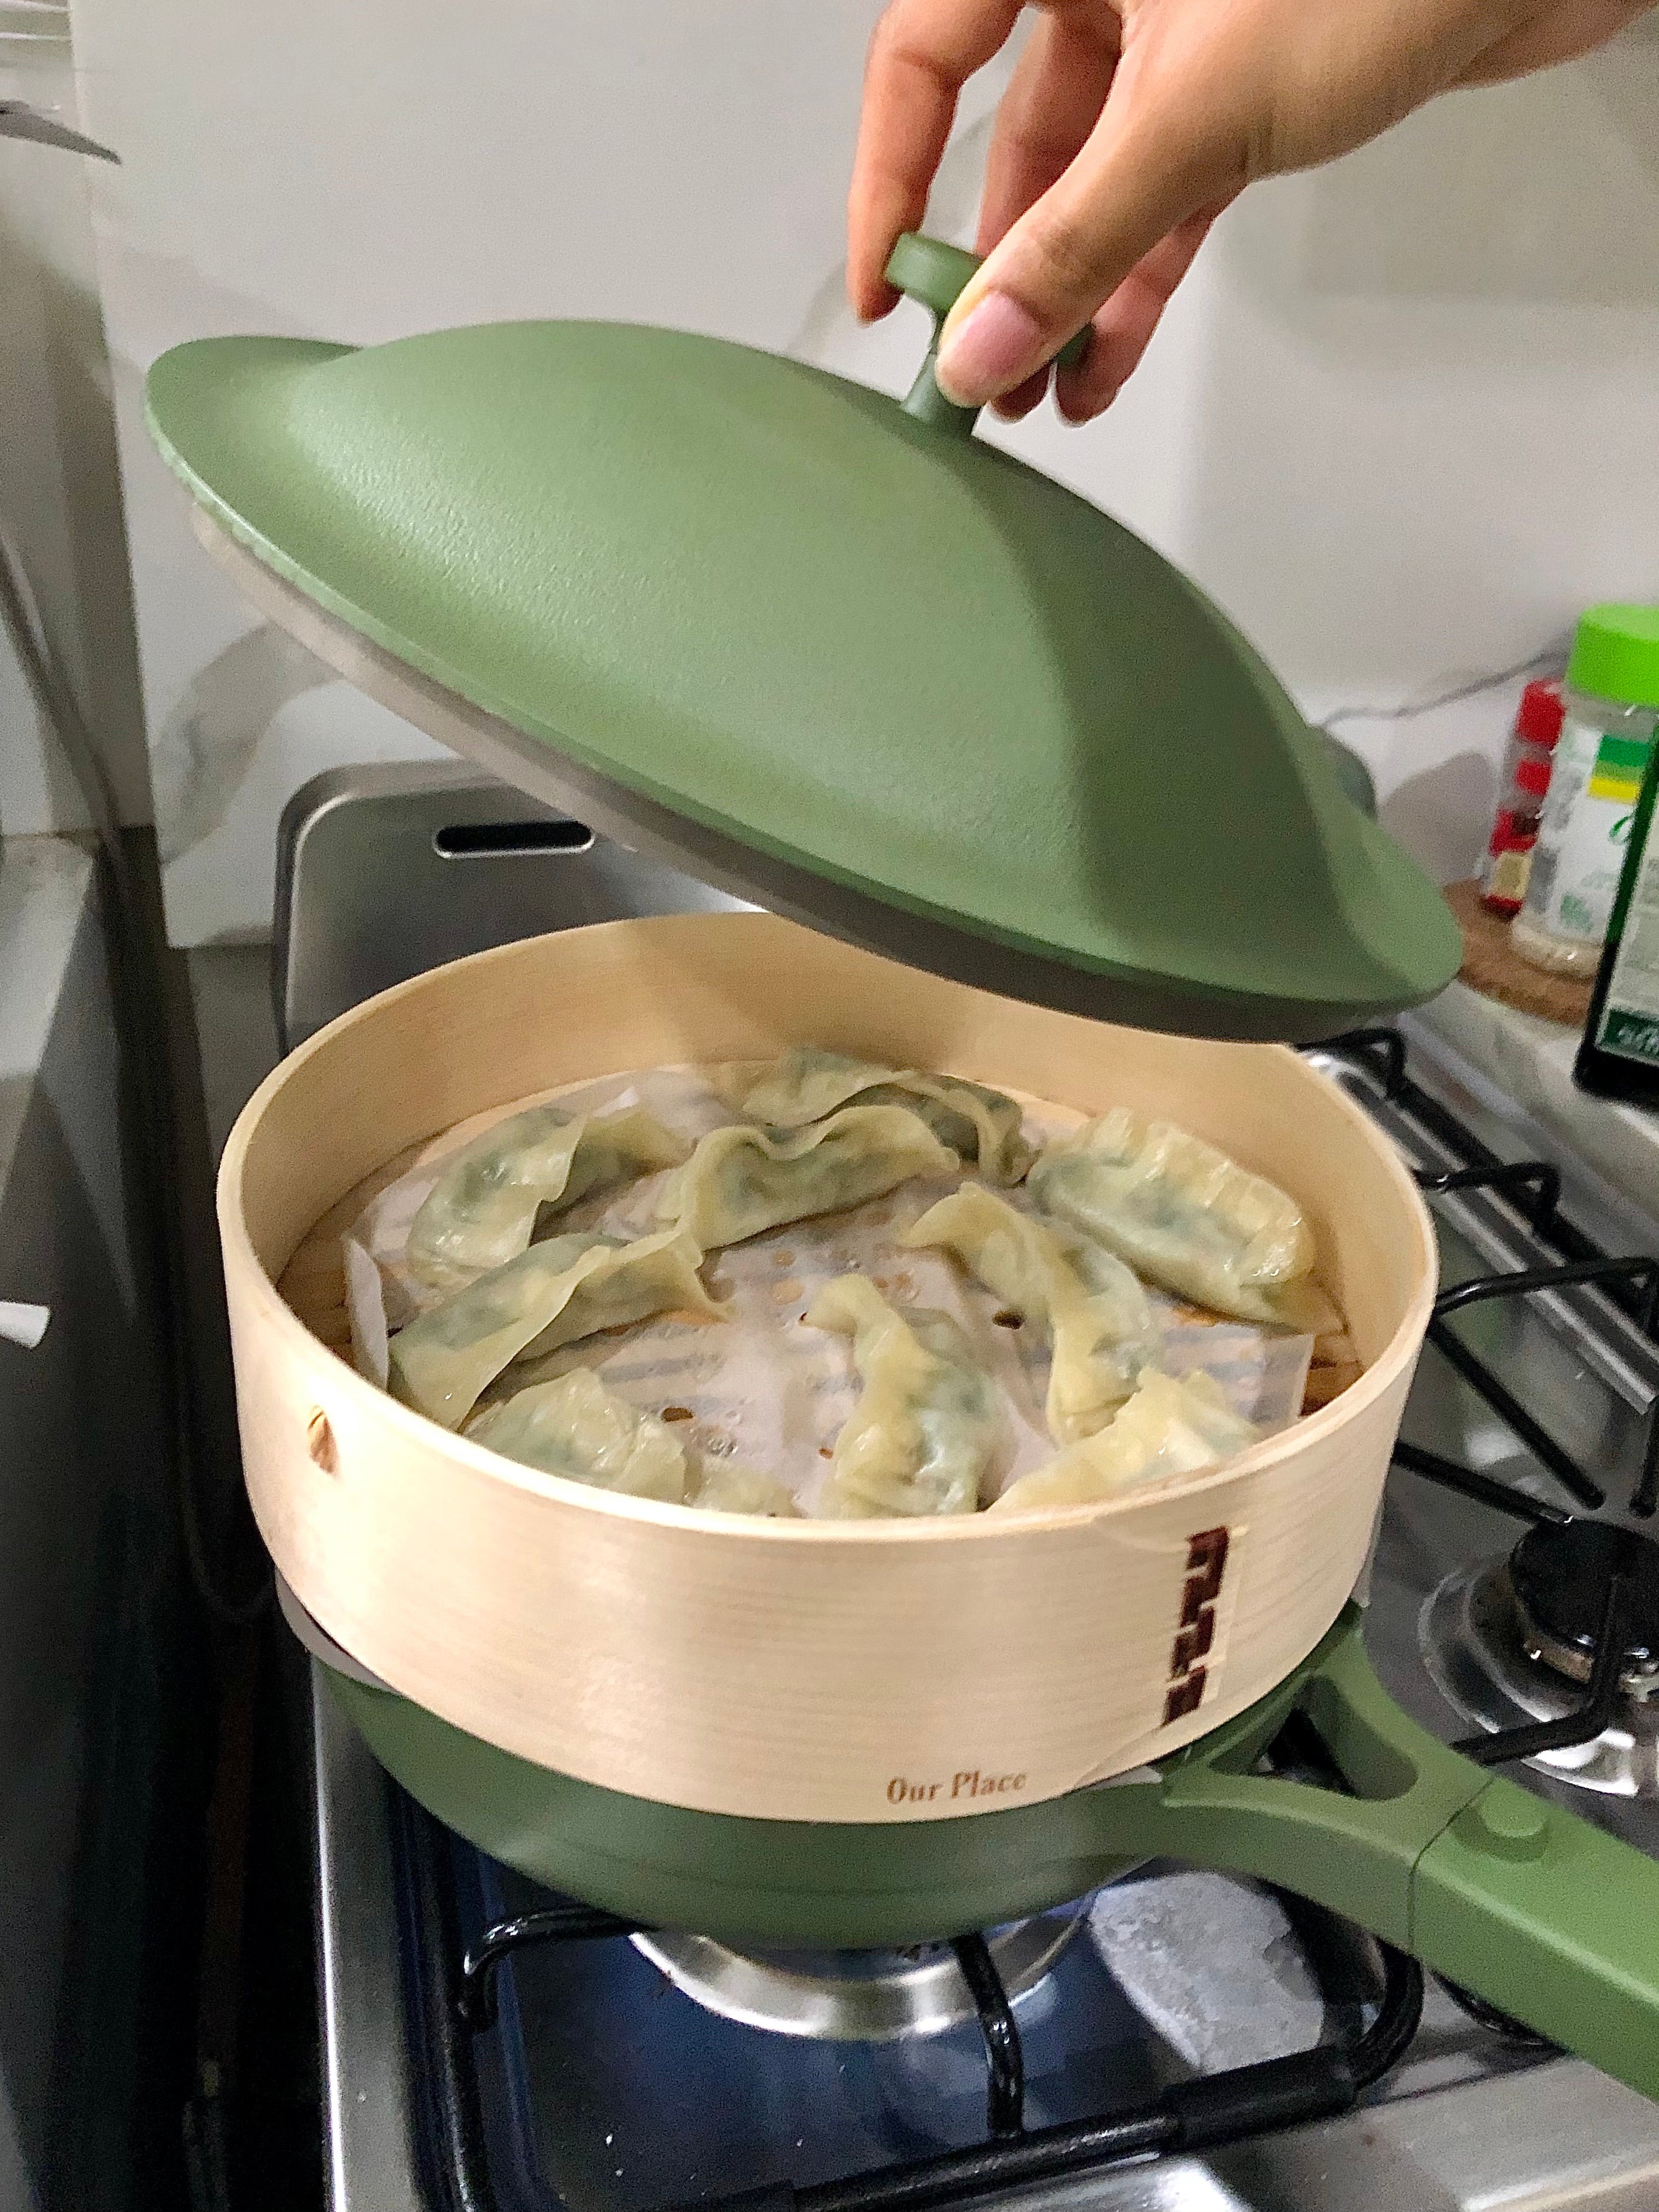 Always Pan Review: An Internet-Famous Eco-Chic Cookware